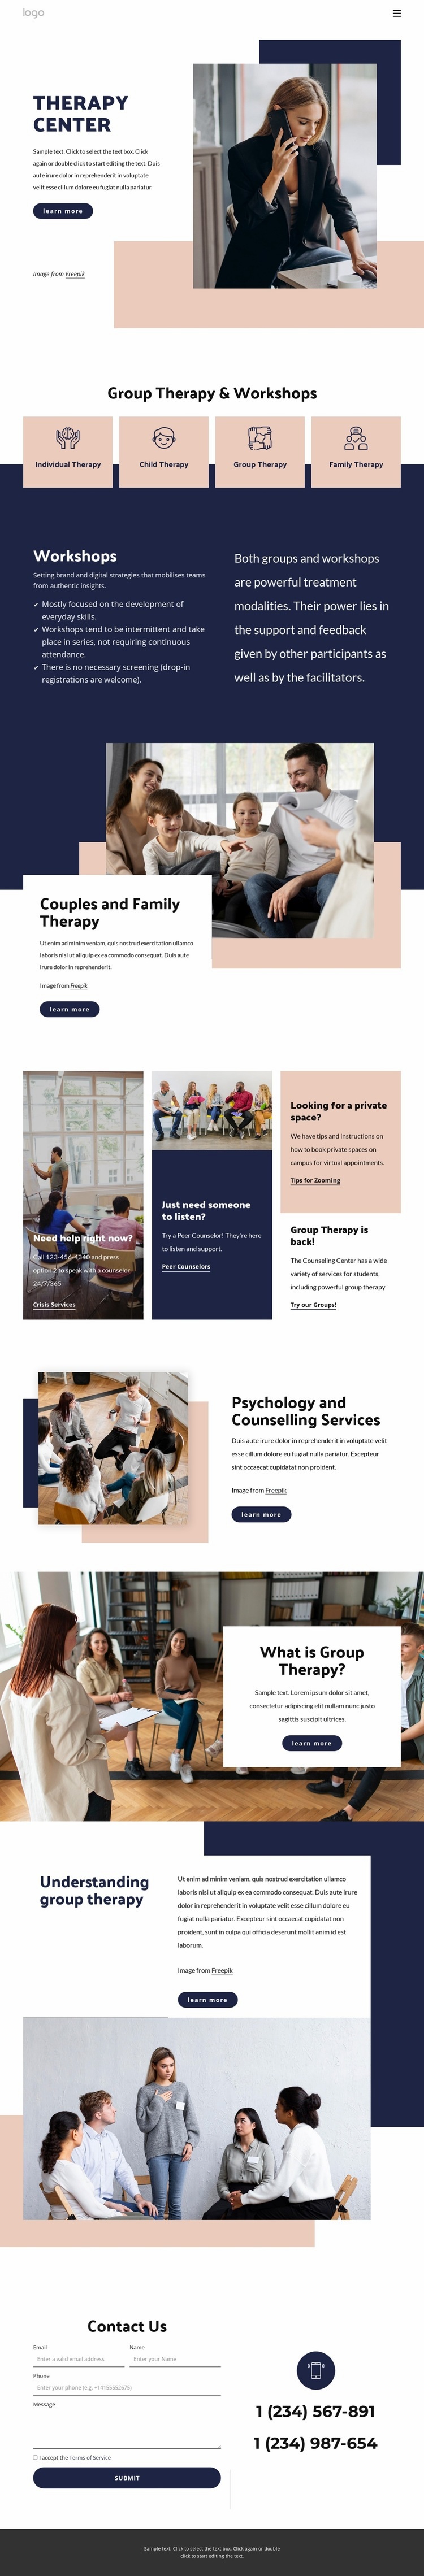 Therapy center Homepage Design